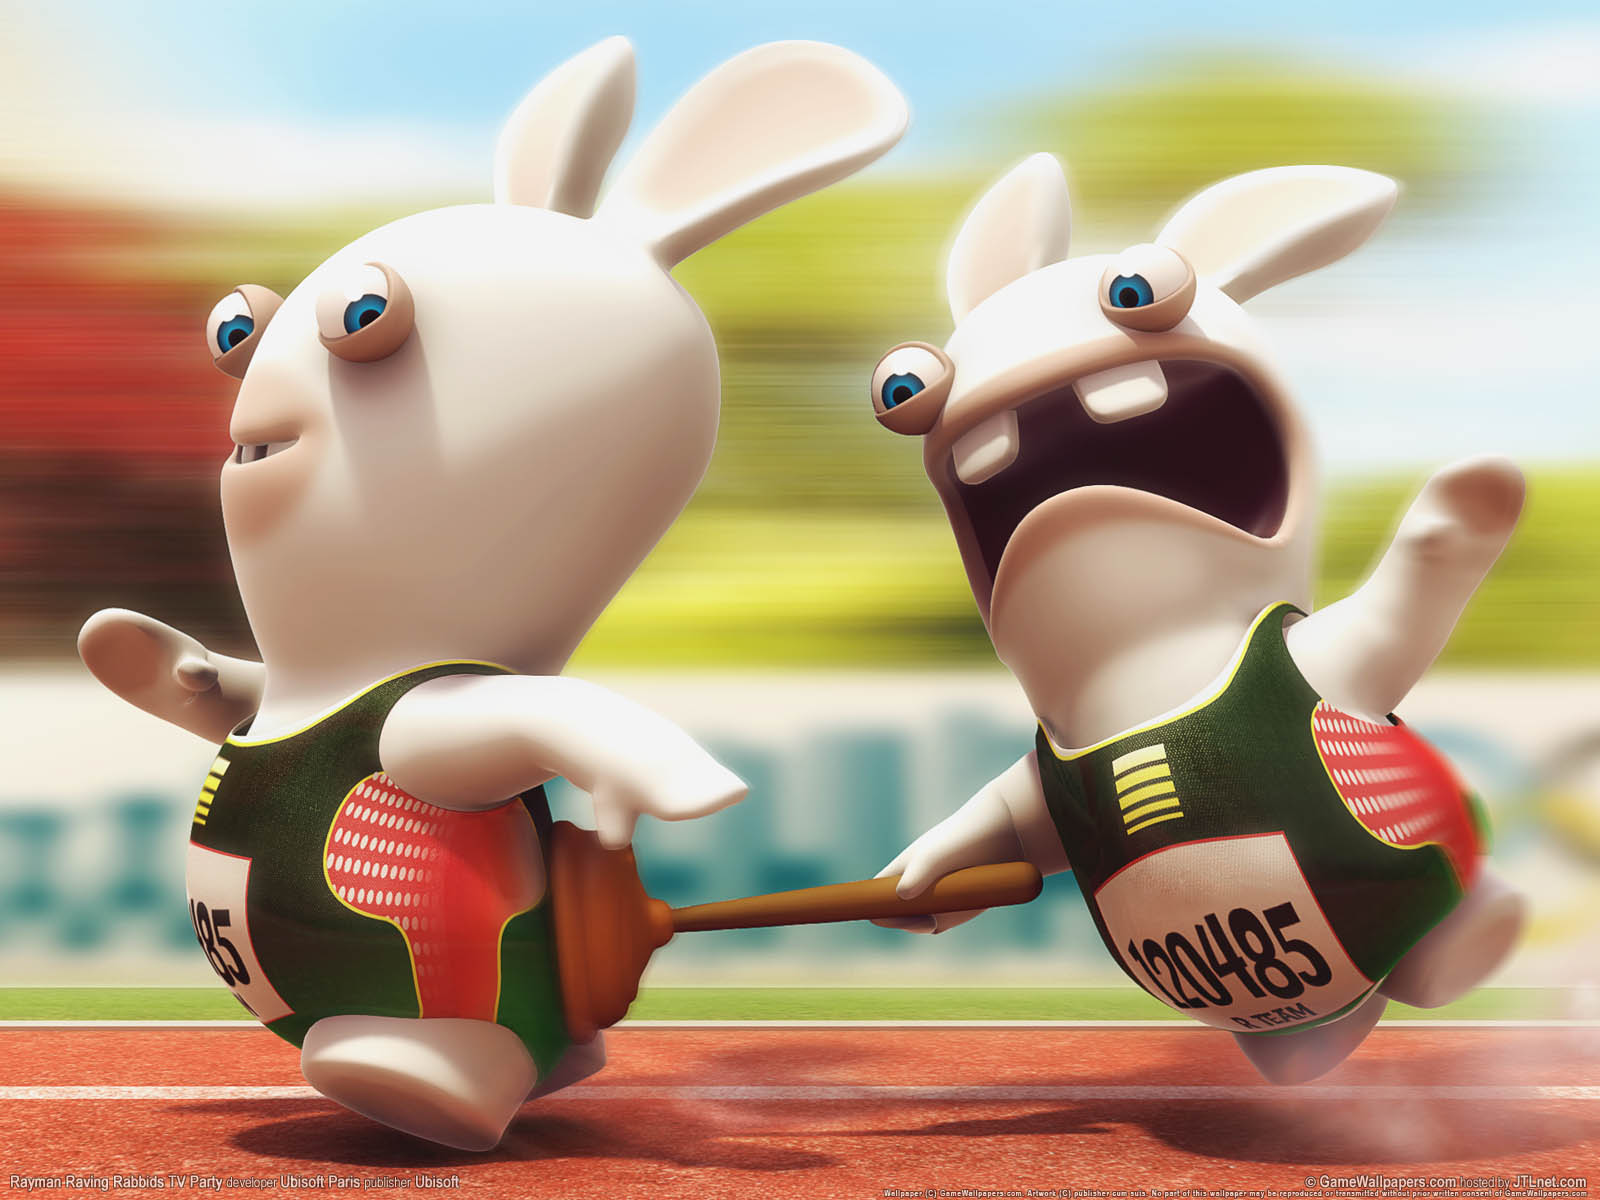 Rayman Raving Rabbids TV Party achtergrond 03 1600x1200